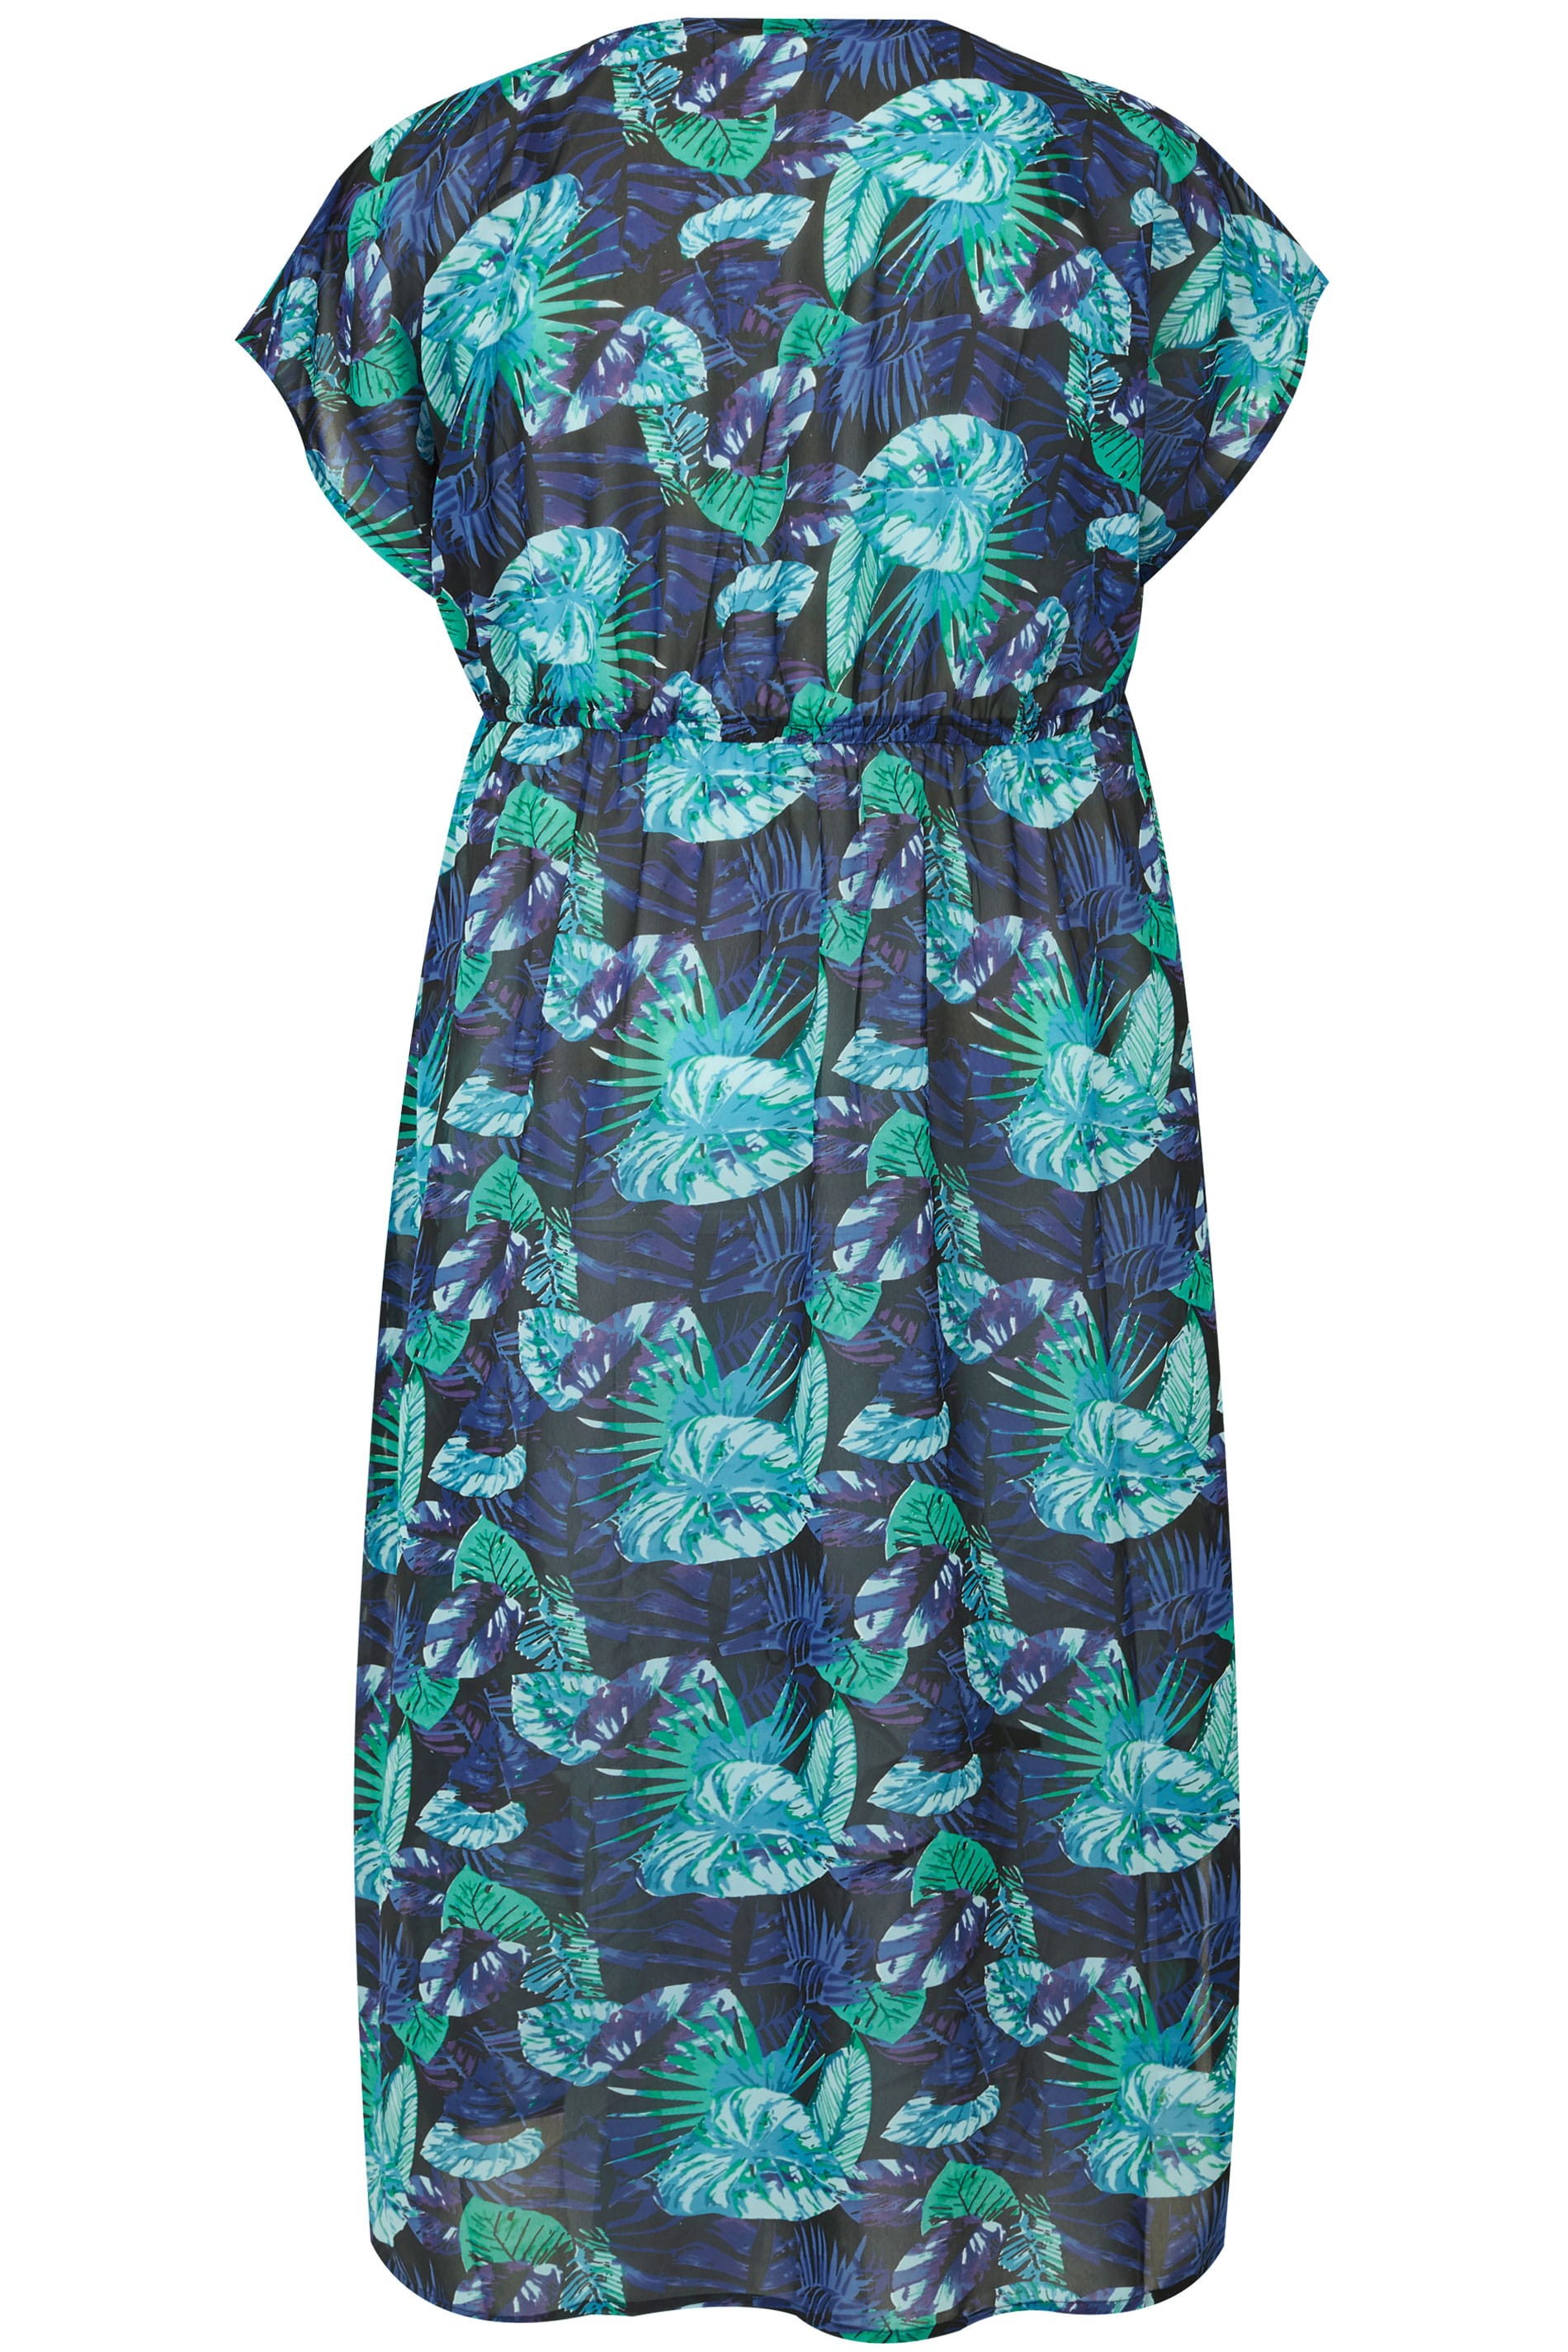 Blue Jungle Leaf Maxi Cover-Up, plus size 16 to 36